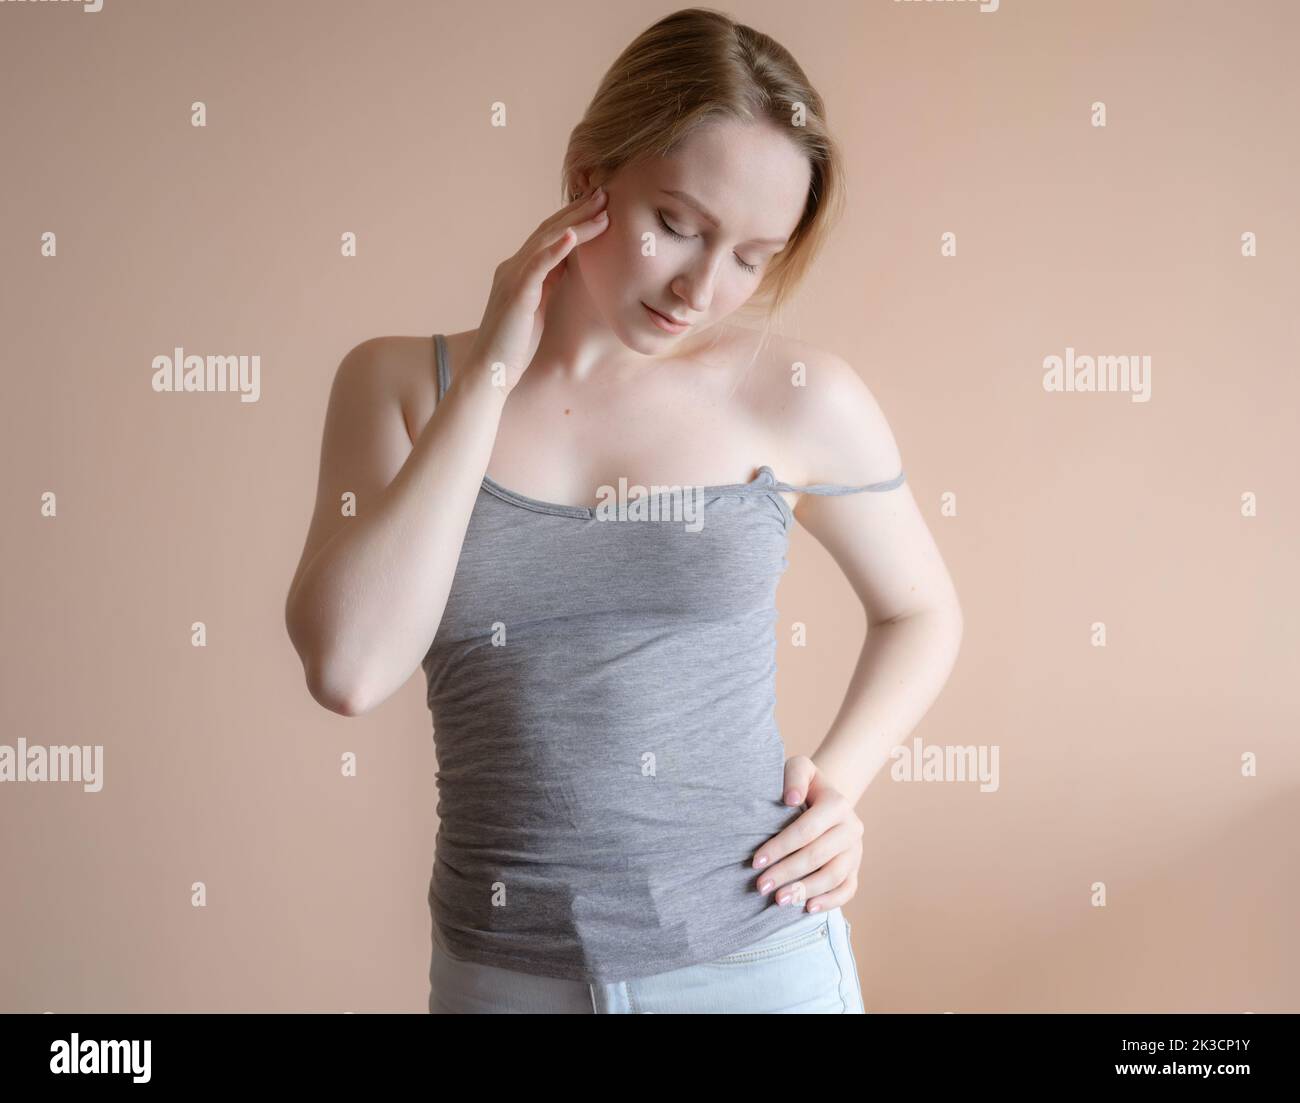 Graceful young woman posing against beige wall. Stock Photo